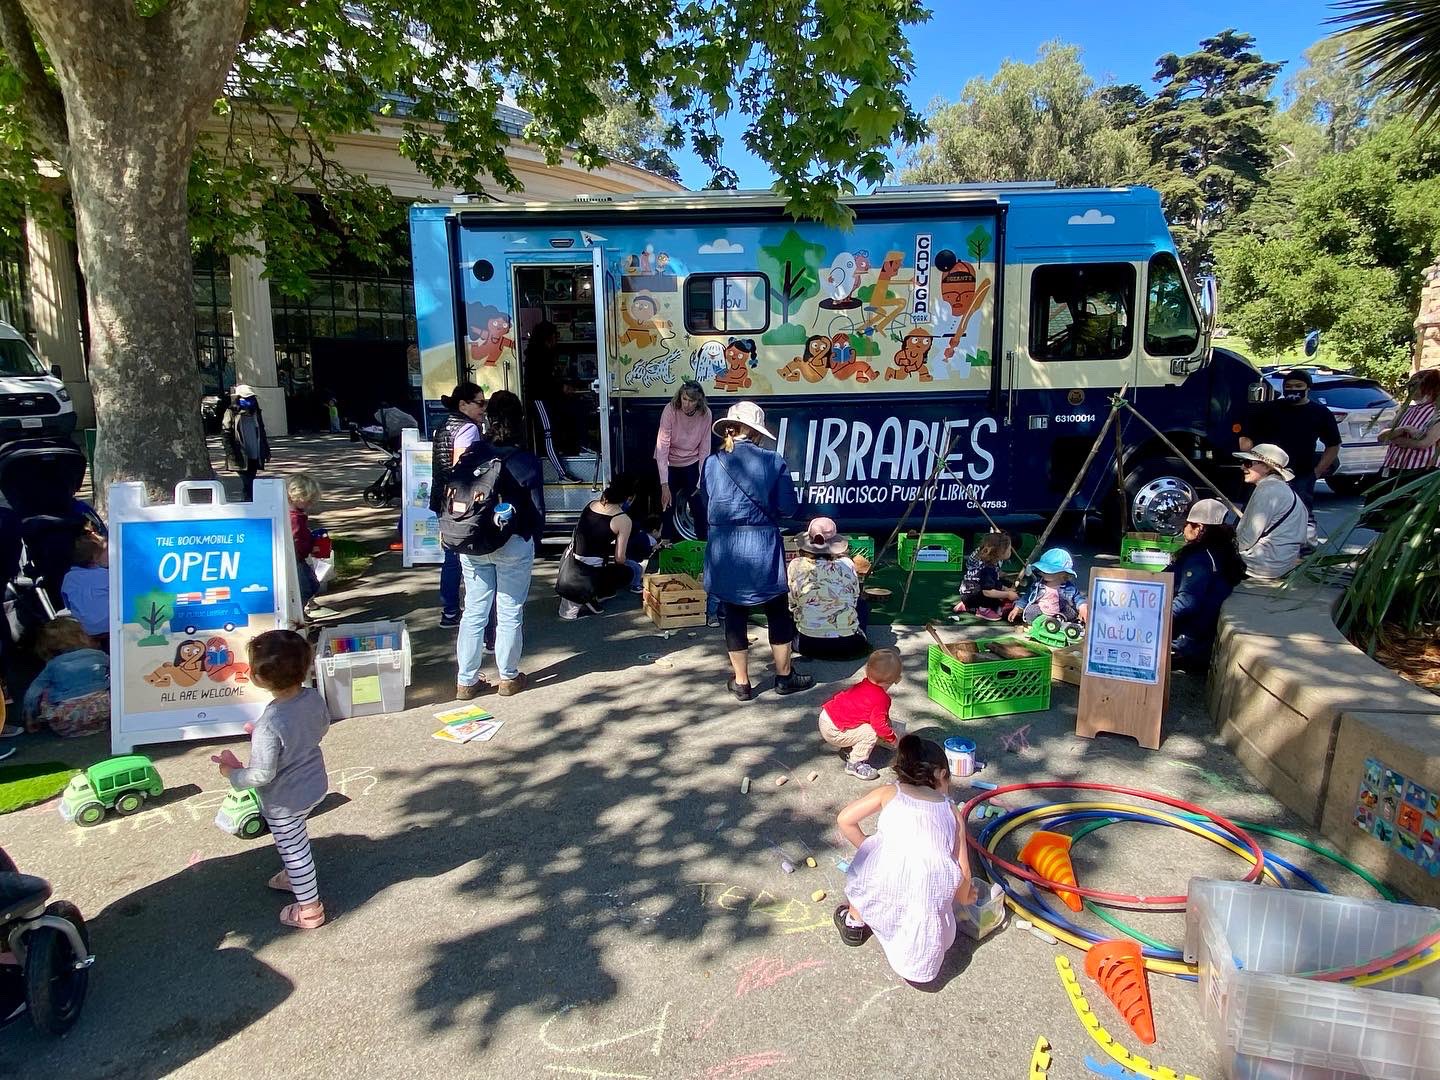 San Francisco Recreation and Park Department on Twitter: "Today  @SFPublicLibrary YouthMobile was at Koret playground in Golden Gate Park,  inspiring a love for books and a connection to nature through play. Catch